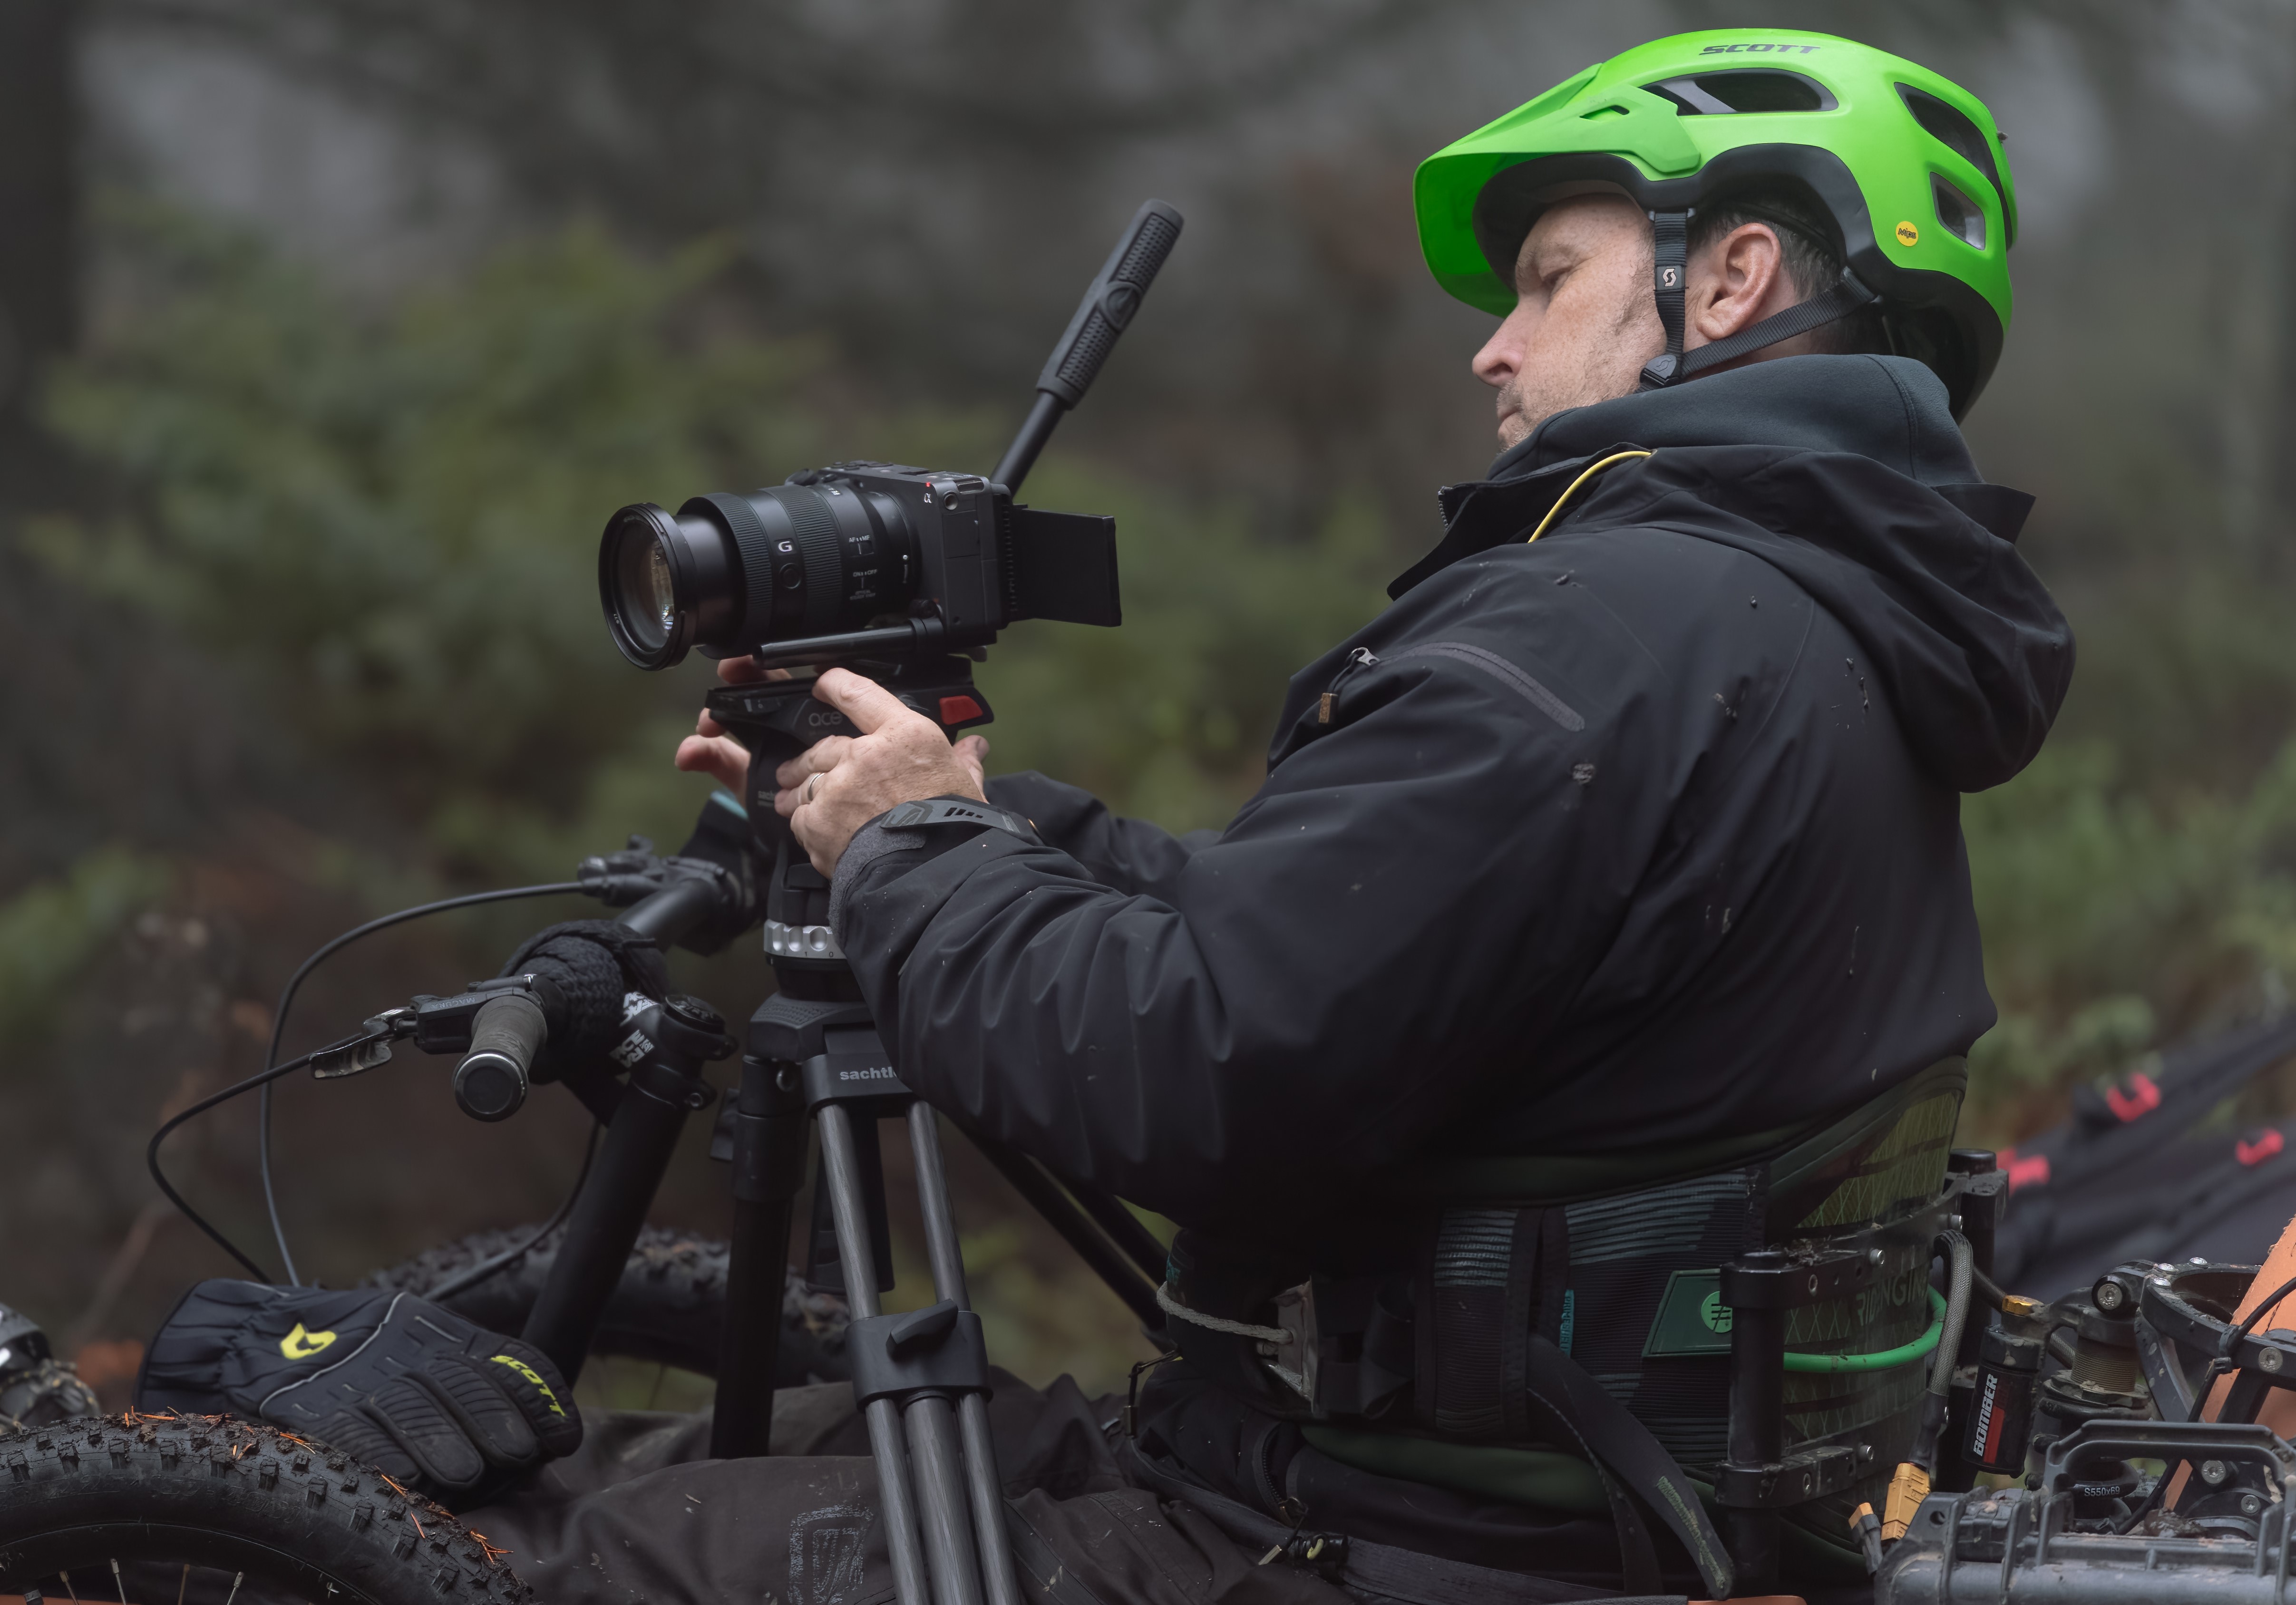 Jake, wearing a lime green helmet, films something off-screen with his camera on a tripod.